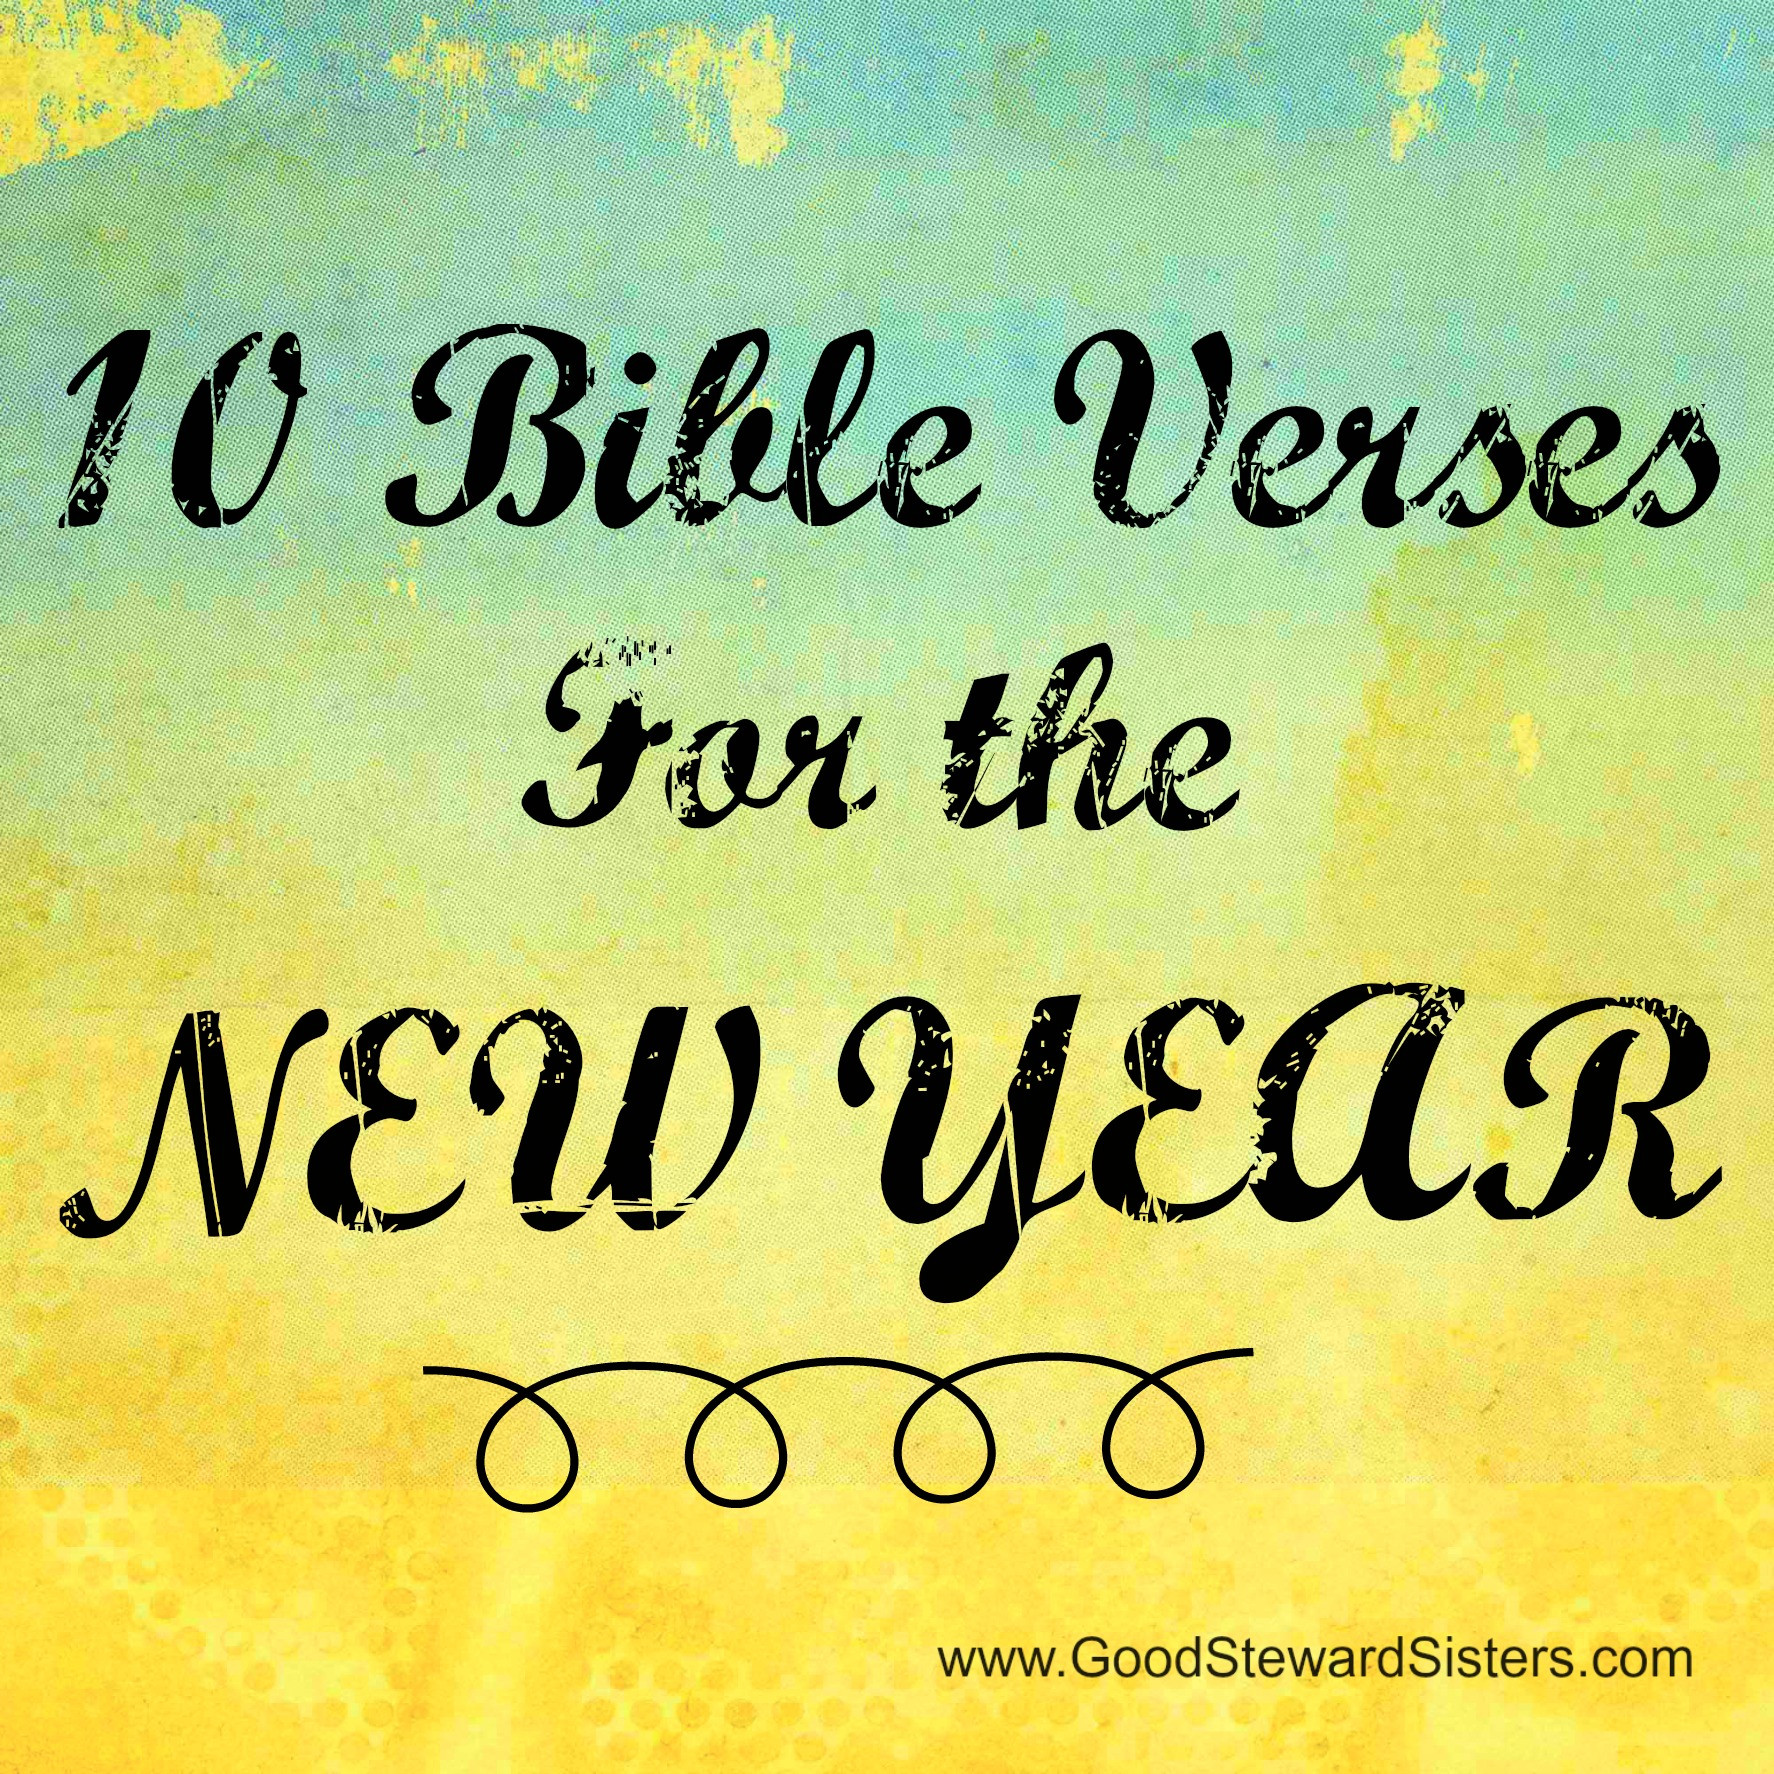 New Year Bible Quotes
 "No More Resolutions" Resolution Good Steward Sisters